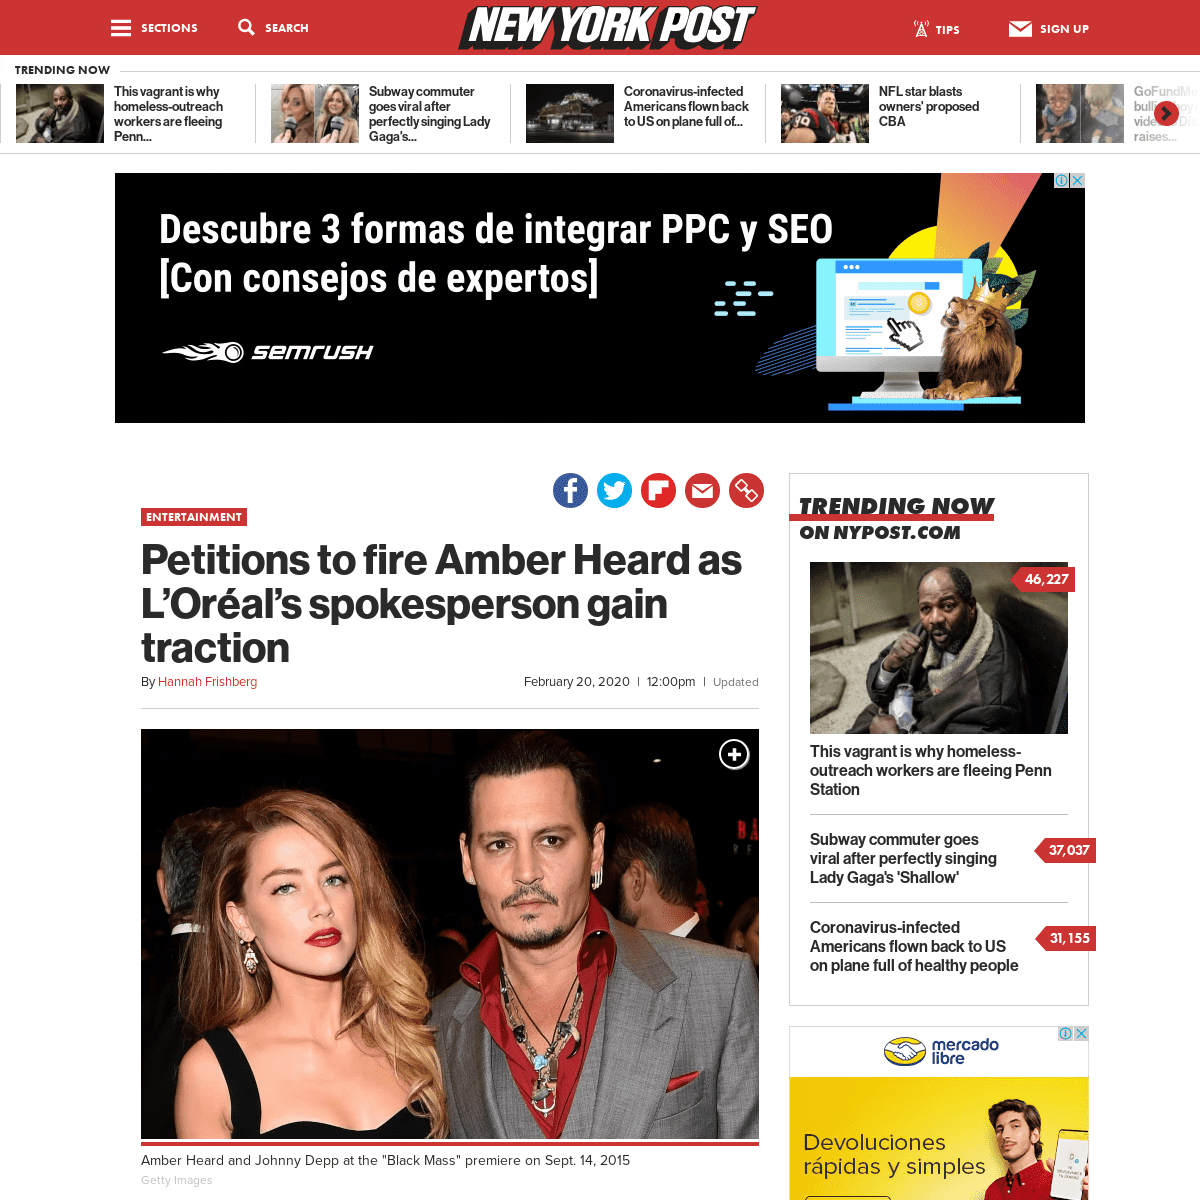 A complete backup of nypost.com/2020/02/20/petitions-to-fire-amber-heard-as-loreals-spokesperson-gain-traction/